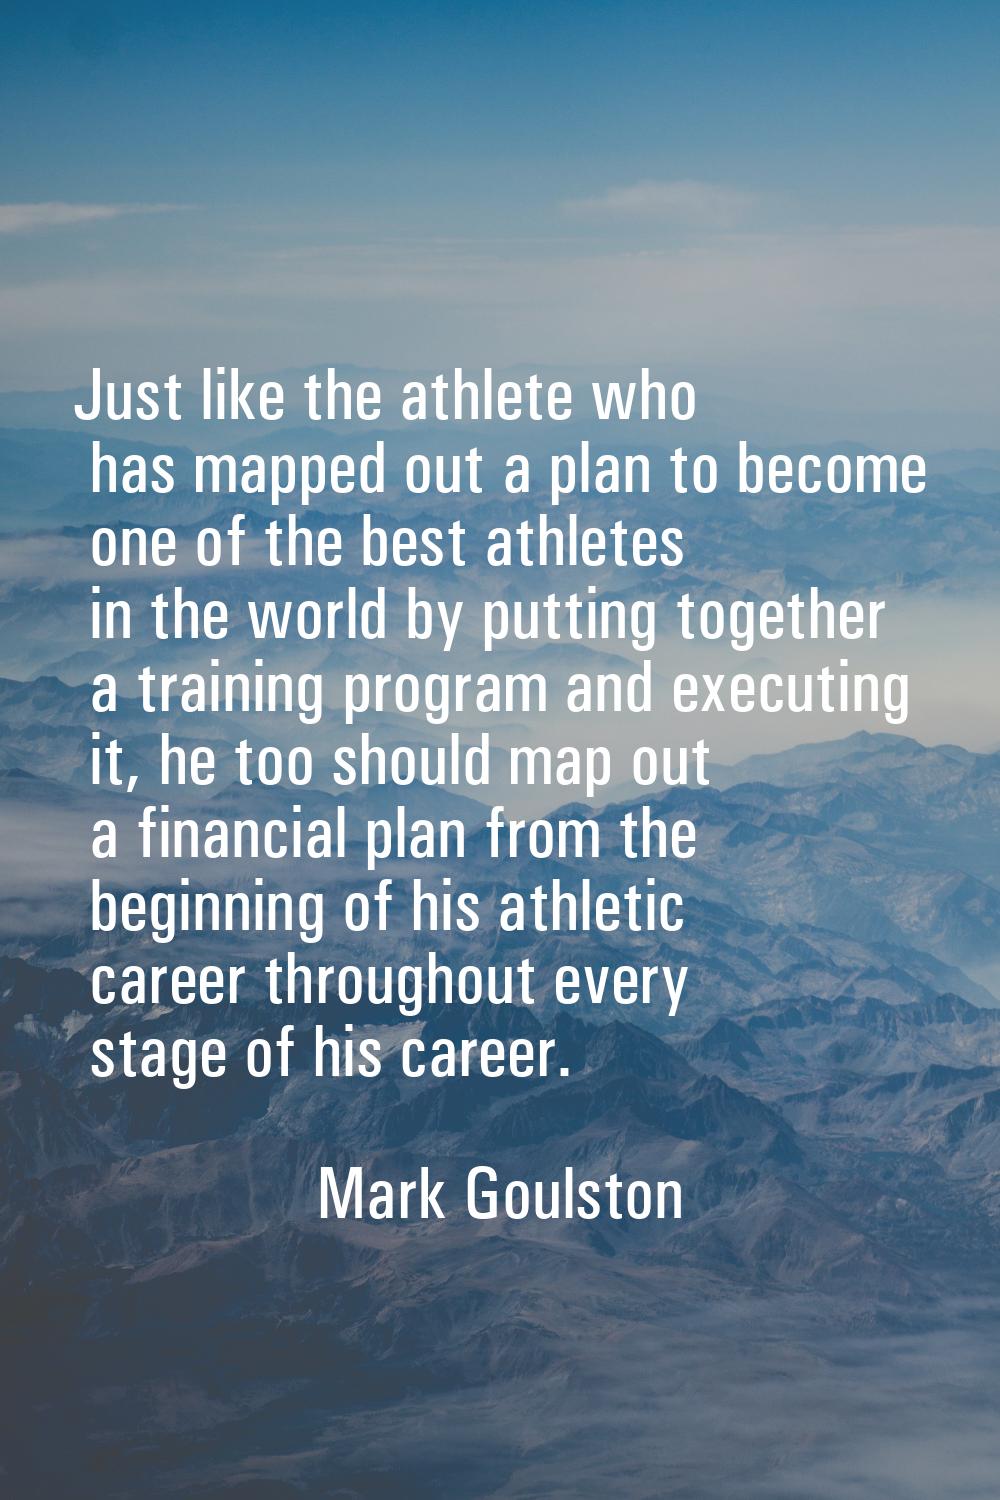 Just like the athlete who has mapped out a plan to become one of the best athletes in the world by 